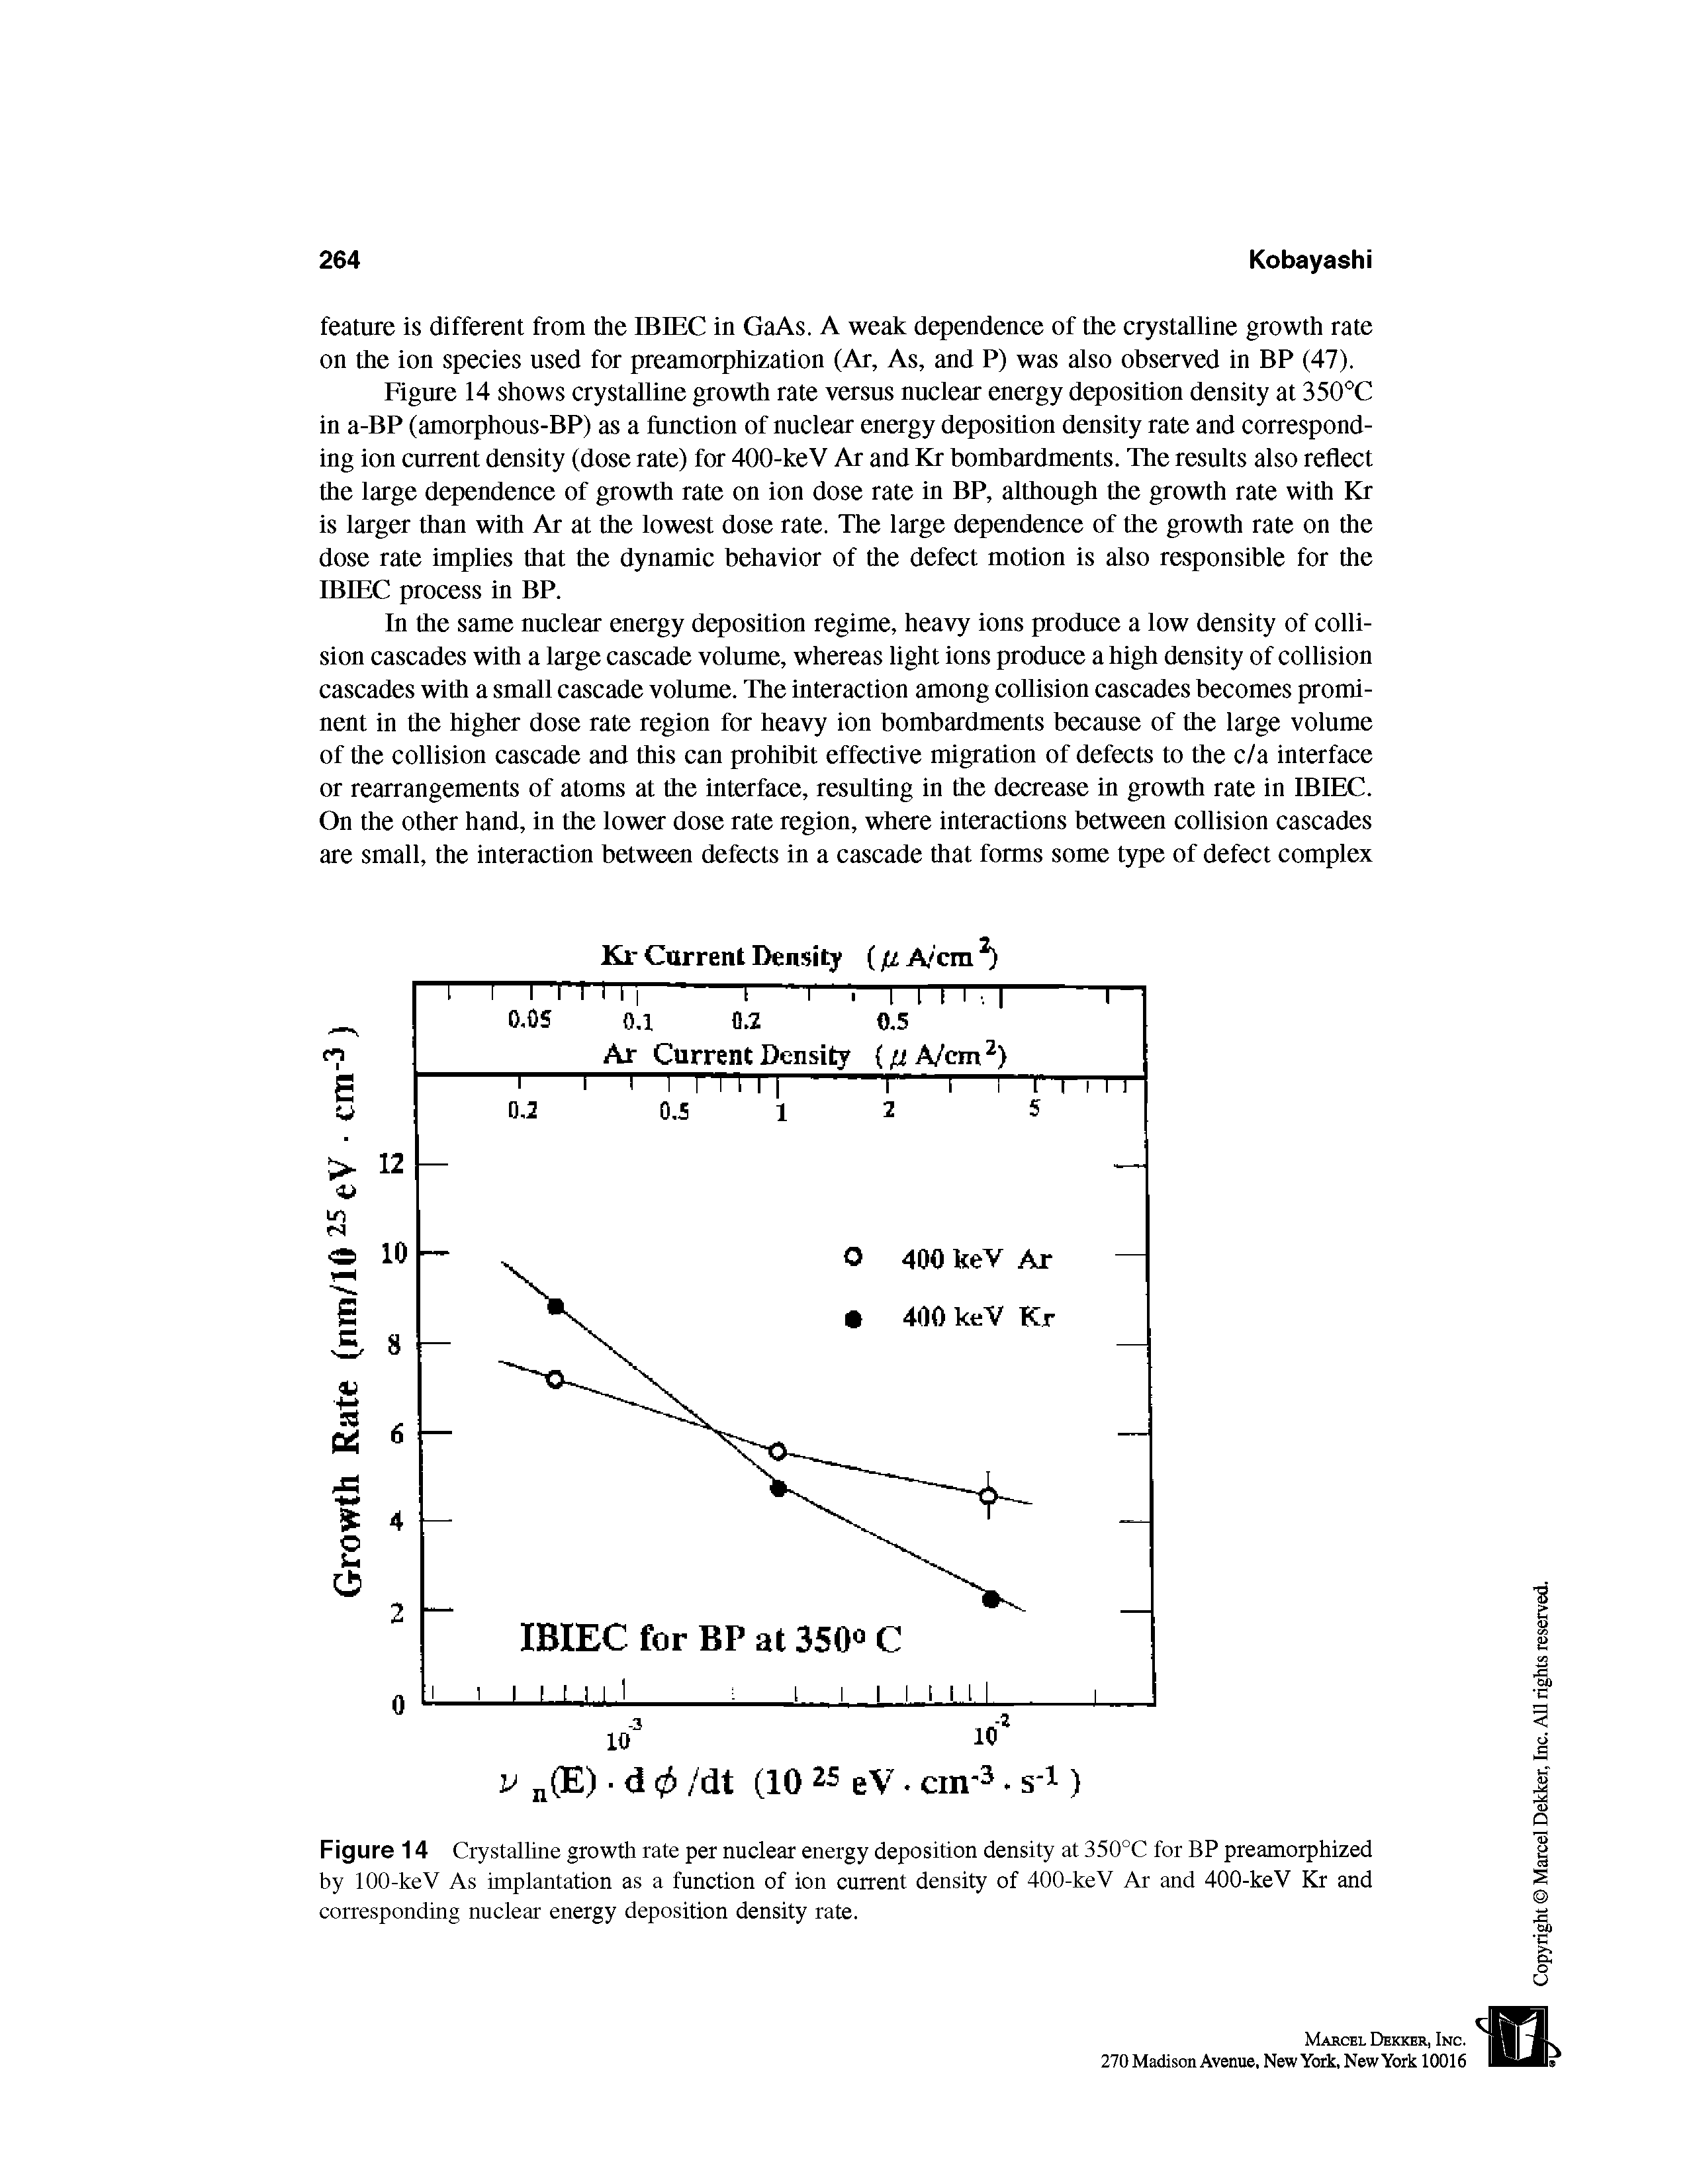 Figure 14 Crystalline growth rate per nuclear energy deposition density at 350°C for BP preamorphized by 100-keV As implantation as a function of ion current density of 400-keV Ar and 400-keV Kr and corresponding nuclear energy deposition density rate.